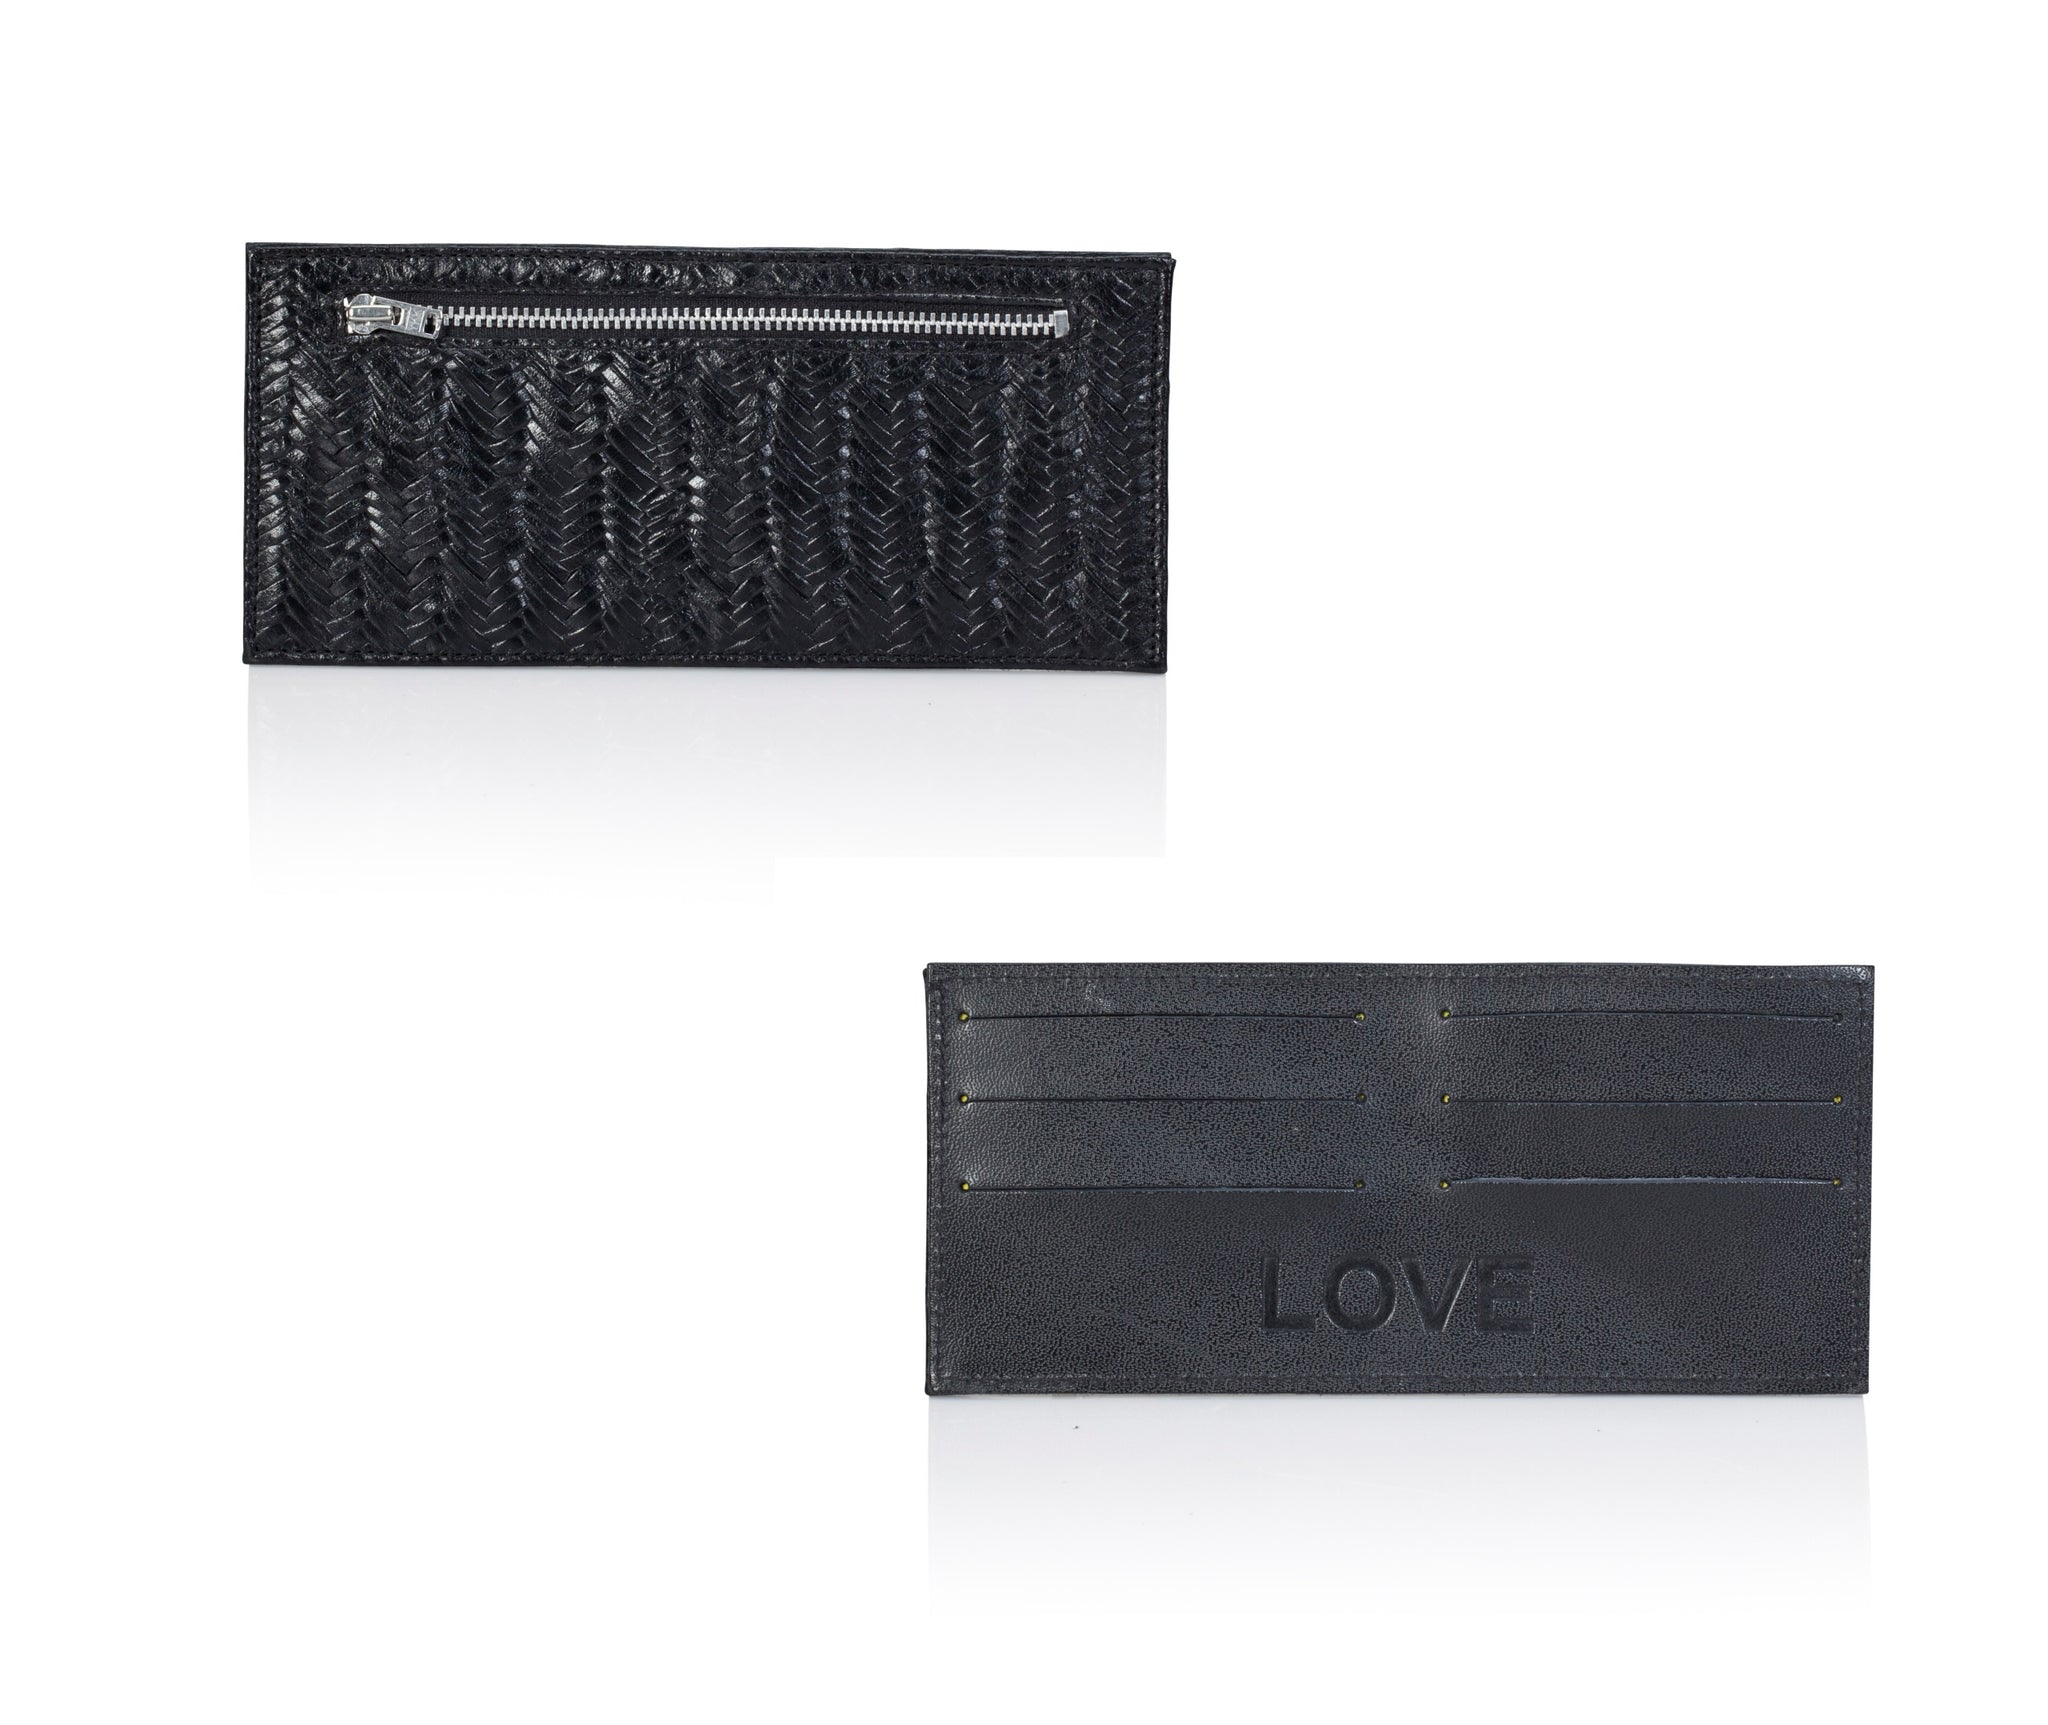 This slim and practical black leather wallet is designed to be added to your favorite bag or purse without adding unnecessary bulk to your look. Features 6 card slots for up to 18 cards, a zip pocket for cash, and a minimalist luxury design for everyday use & style. This magical accessory is the ideal gift for any occasion.